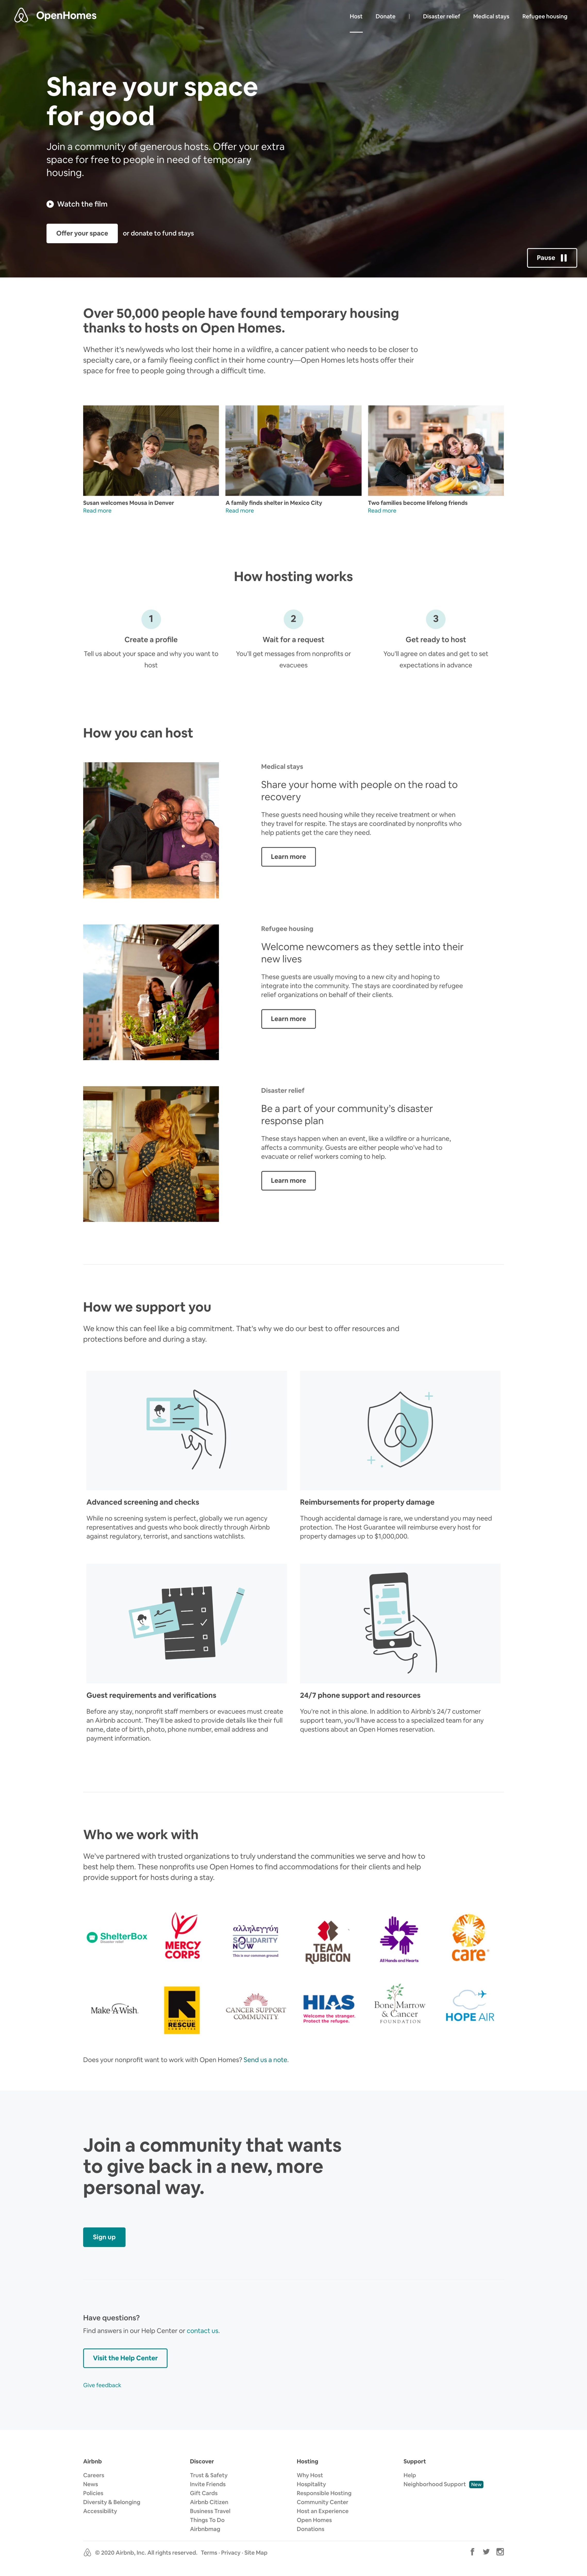 airbnb open homes page